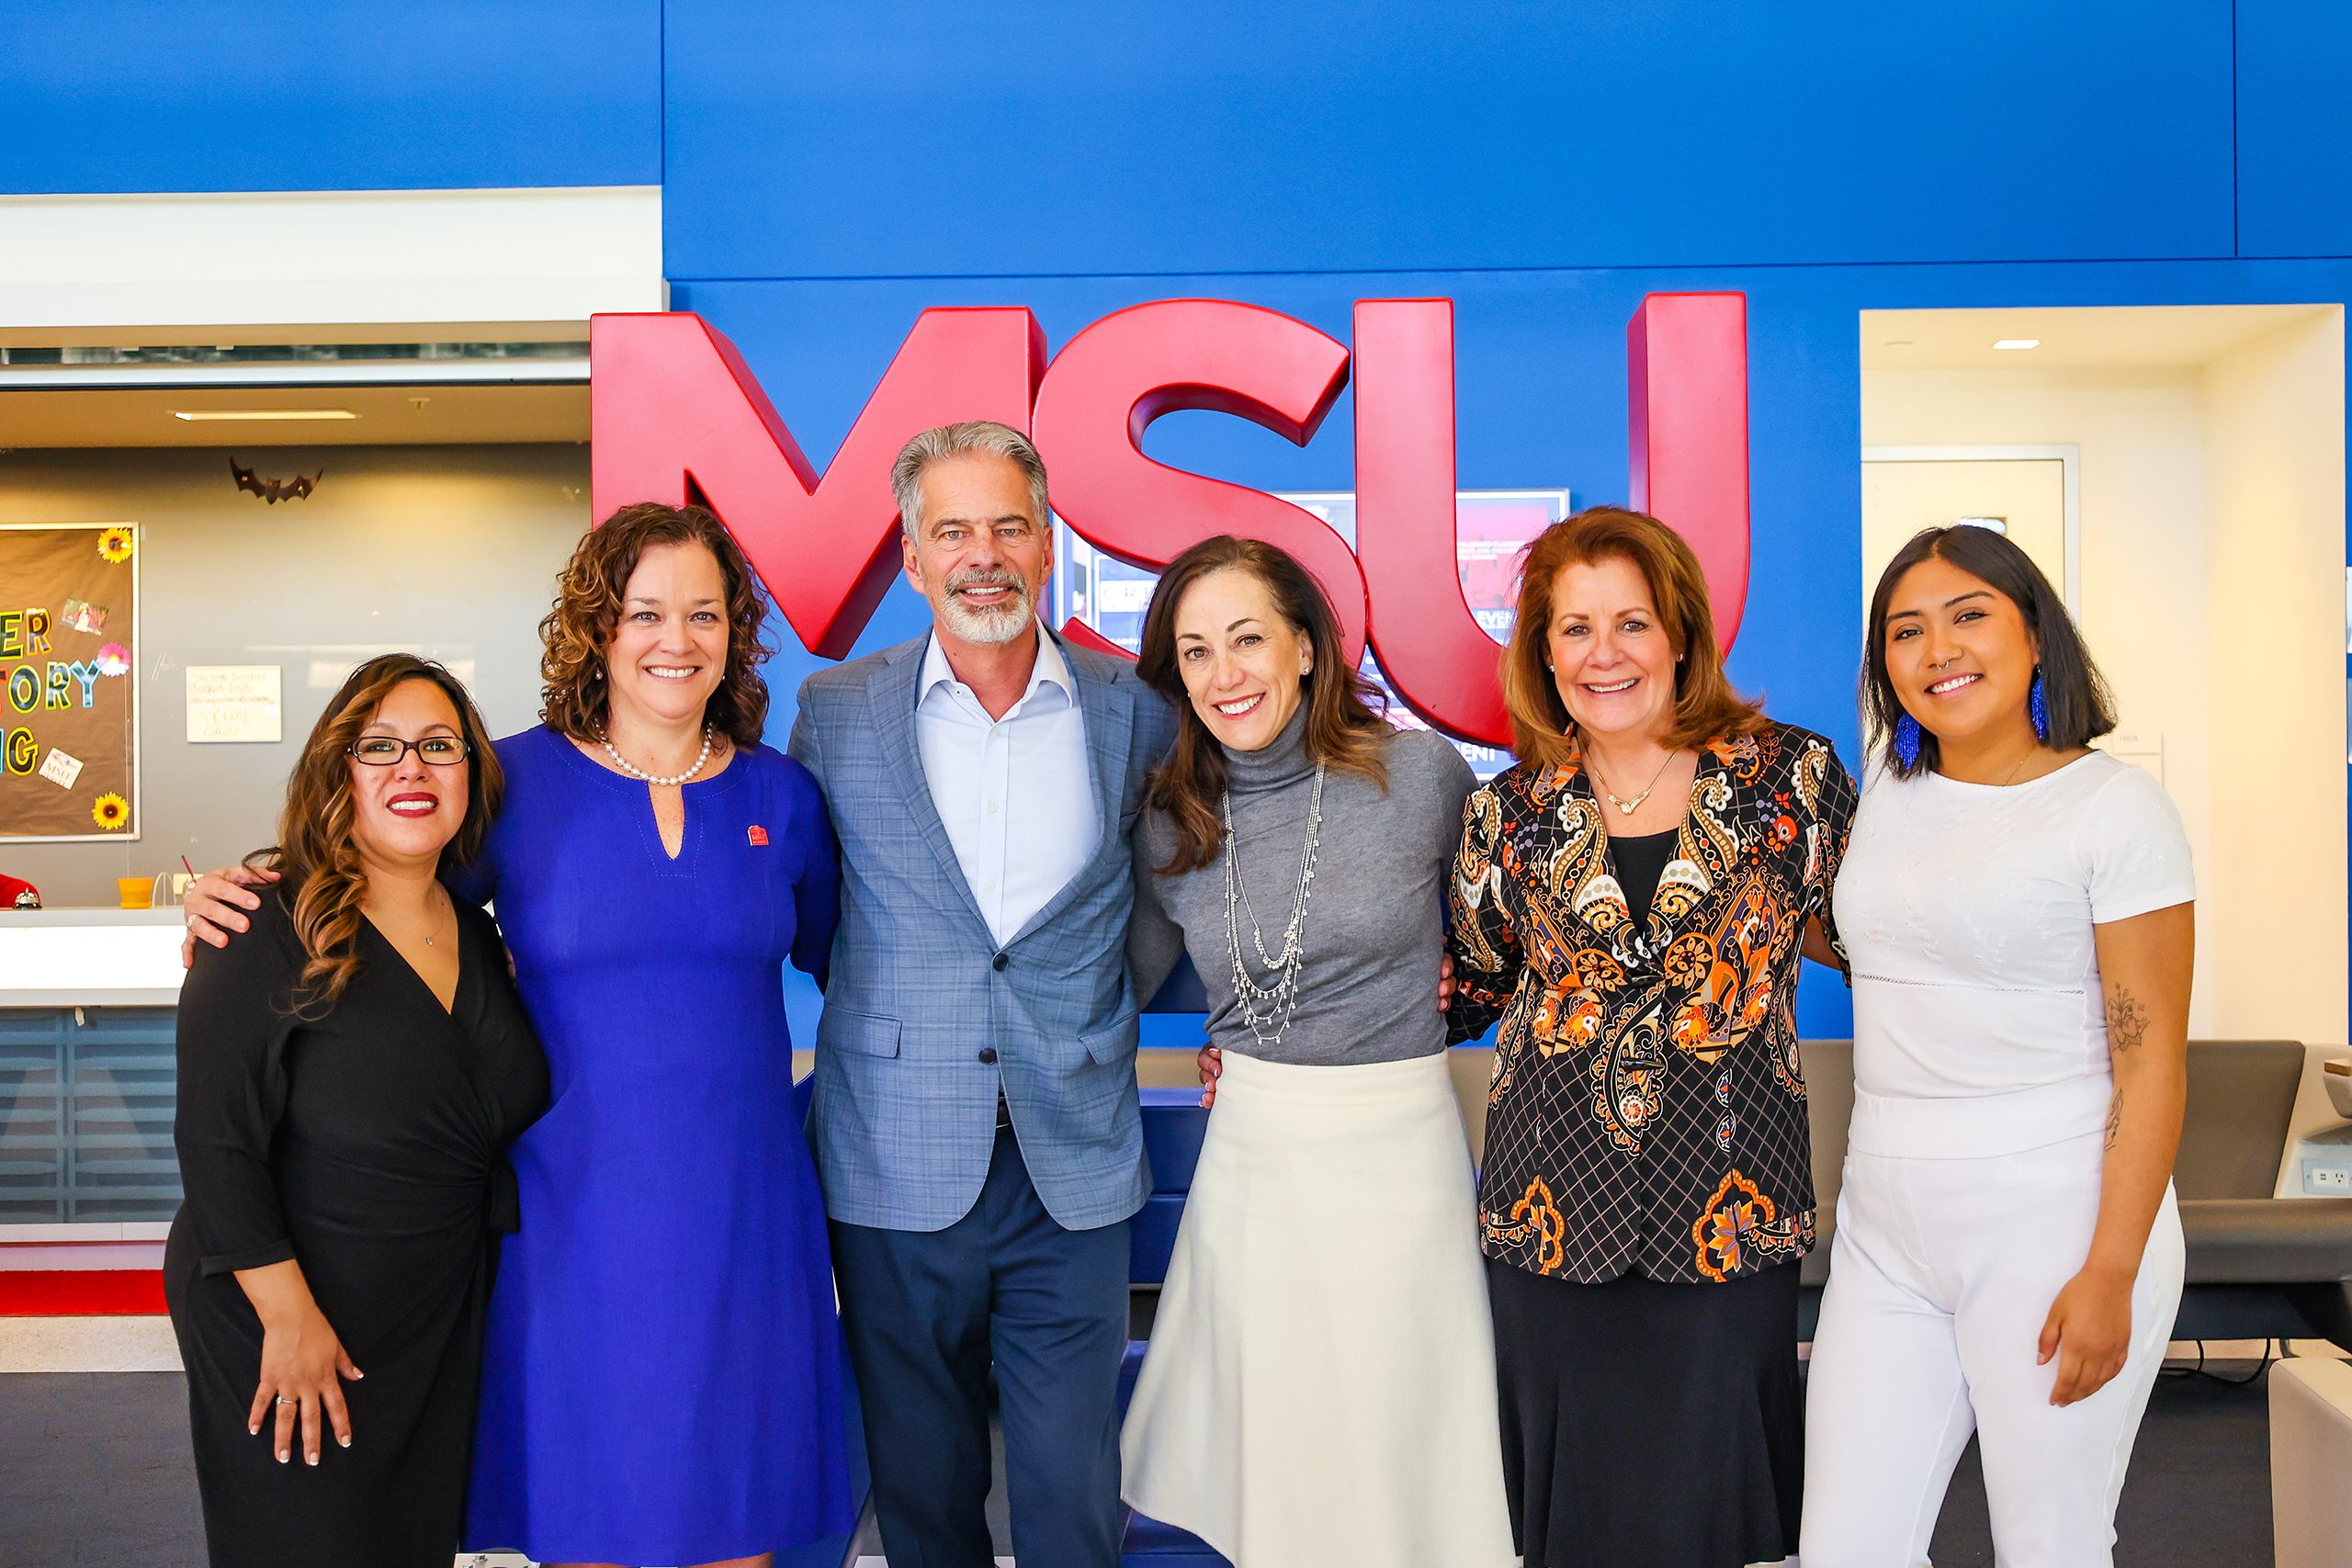 (L-R) Cynthia Baron, Christine Márquez-Hudson, Ferd Belz, Janine Davidson, Christy Belz, and Mariana Pascual-Miranda, standing in front of the red and blue MSU Denver sign in JSSB.